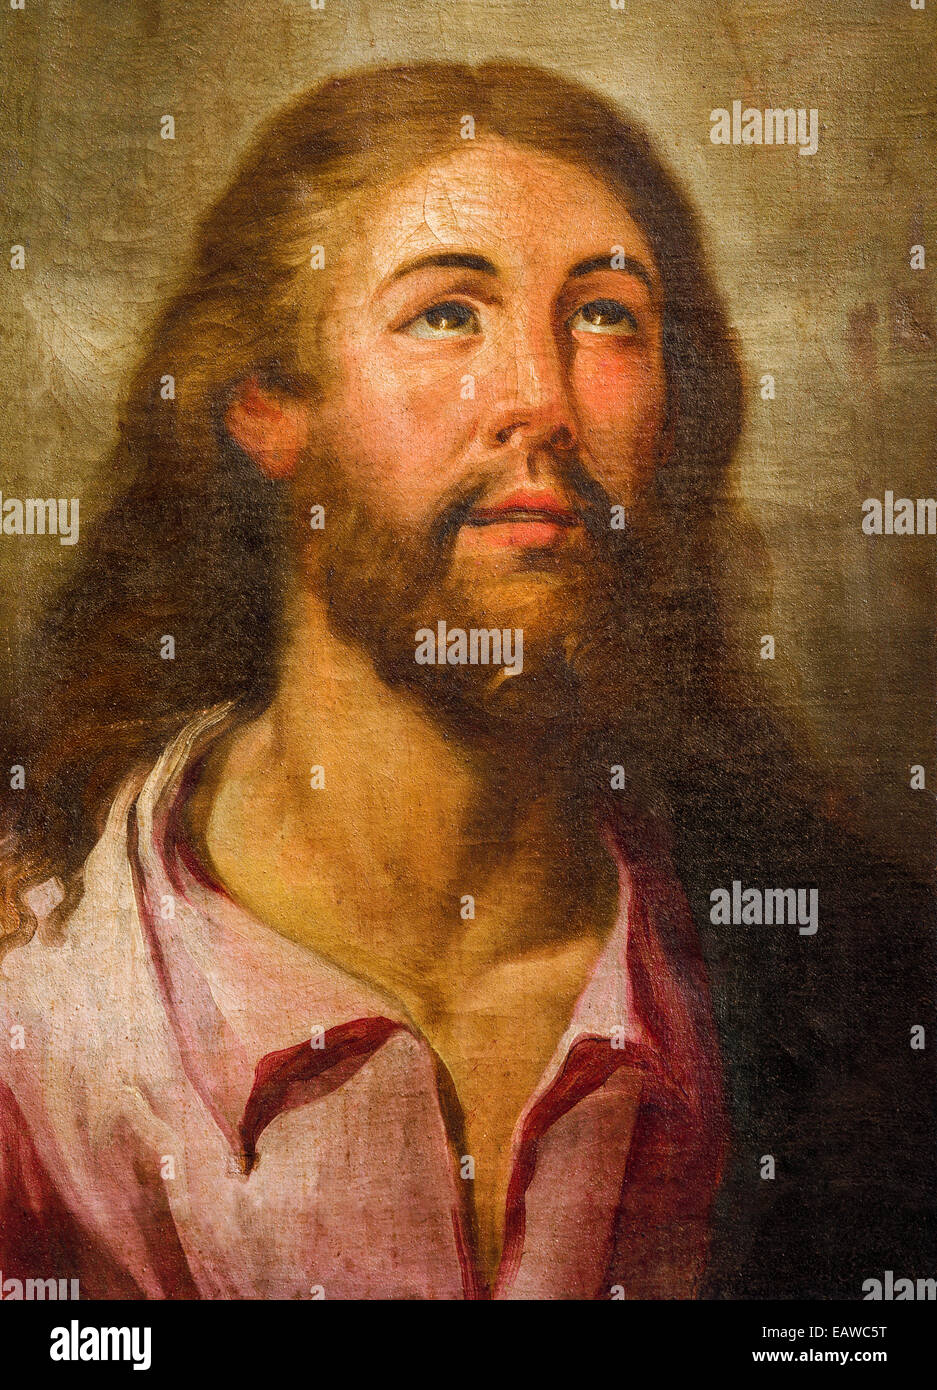 SEVILLE, SPAIN - OCTOBER 29, 2014:  The paint of Jesus Christ in the church Basilica del Maria Auxiliadora by unknown painter. Stock Photo